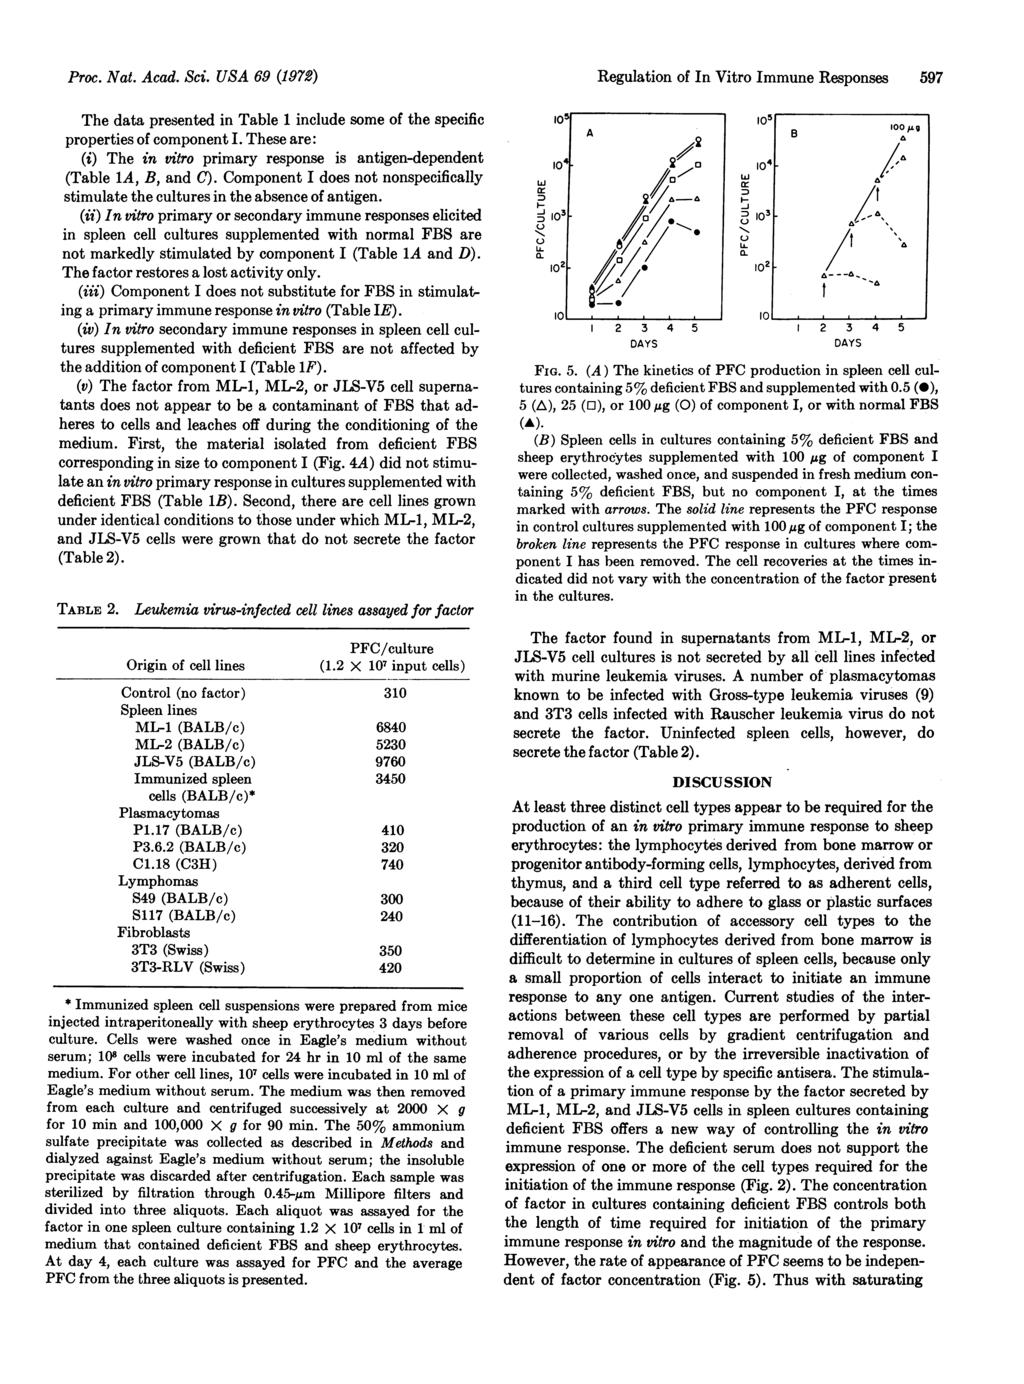 Proc. Nat. Acad. Sci. USA 69 (1972) The data presented in Table 1 include some of the specific properties of component I.